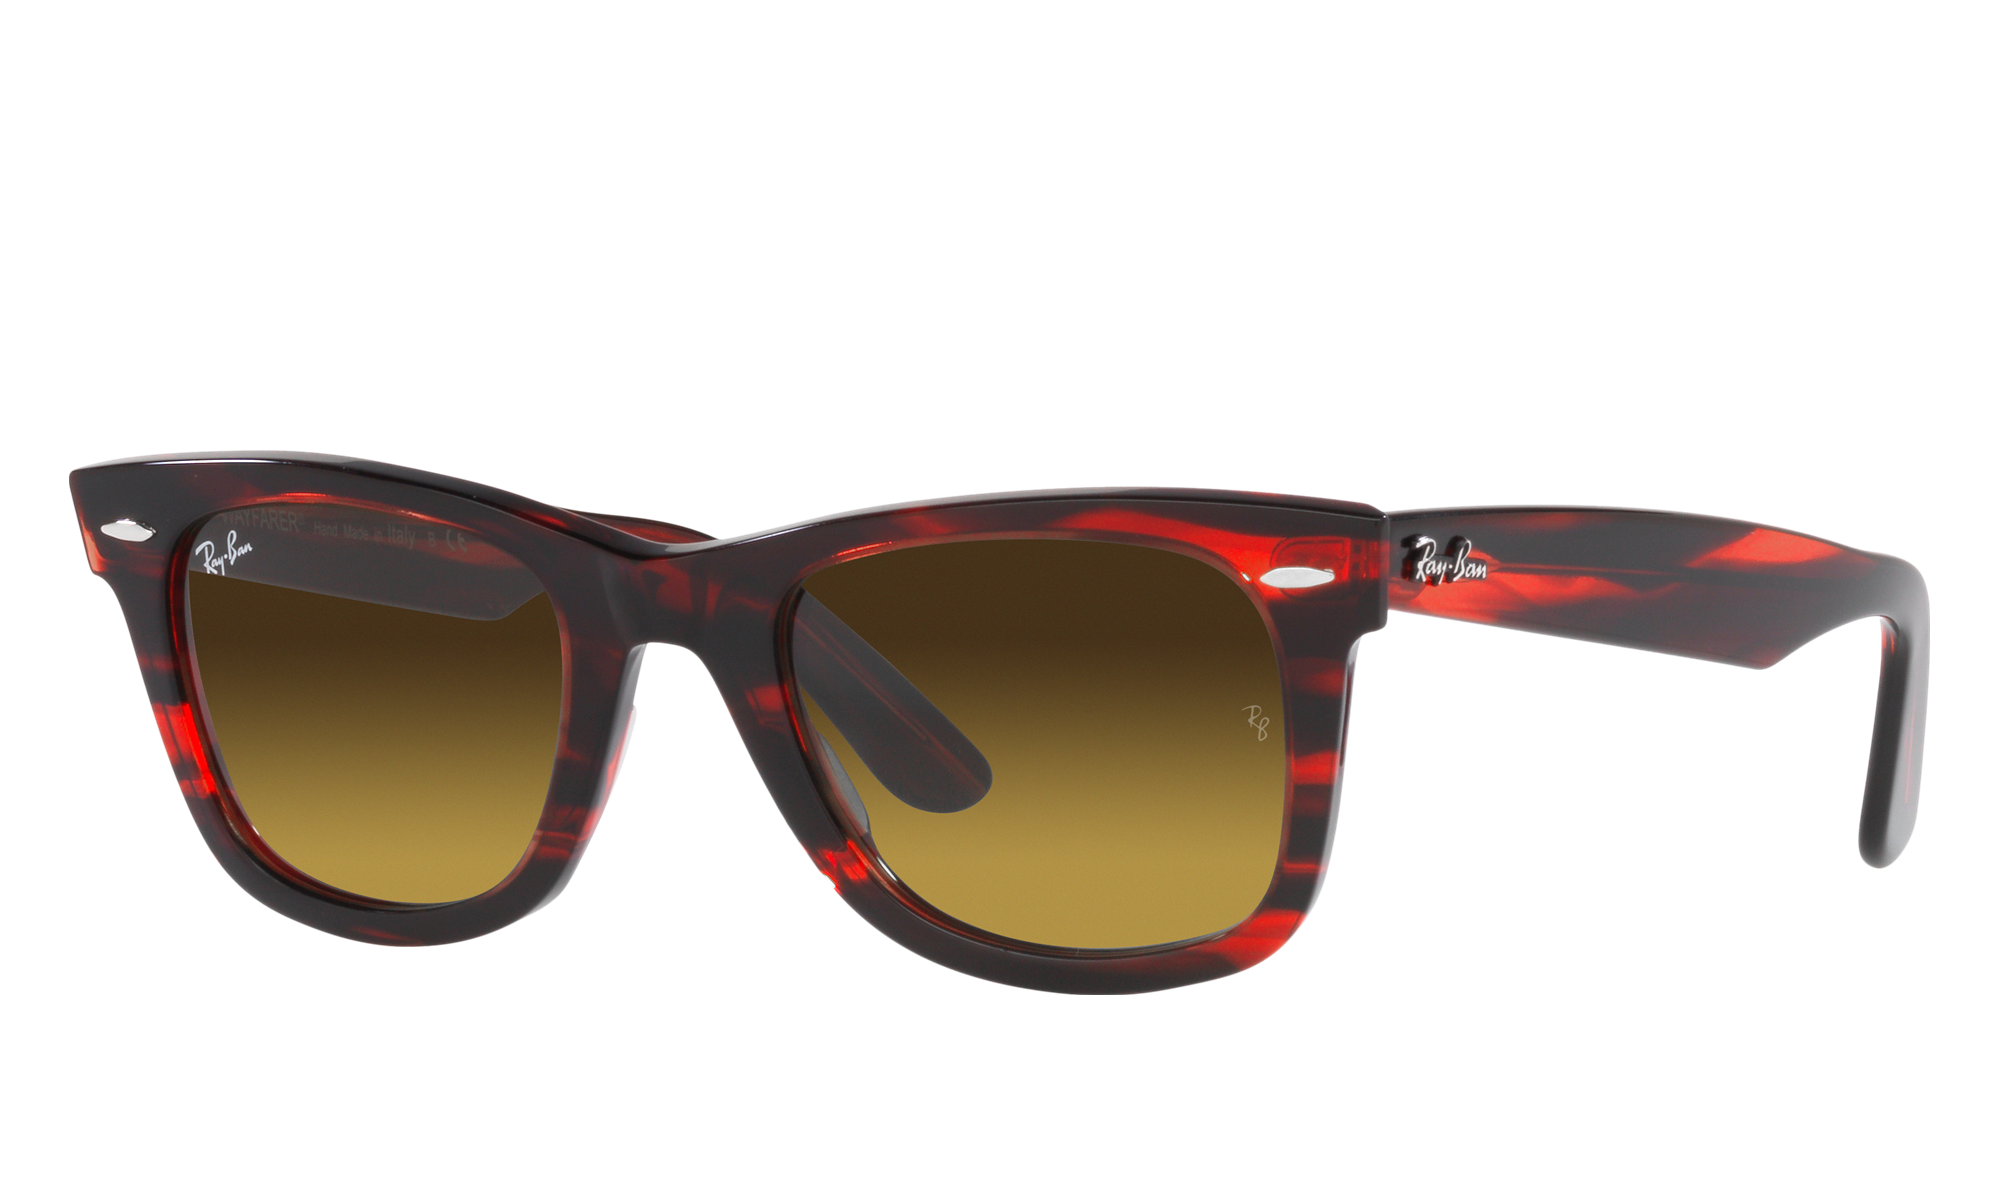 Ray-Ban Unisex Rb2140 Striped Red Size: Large